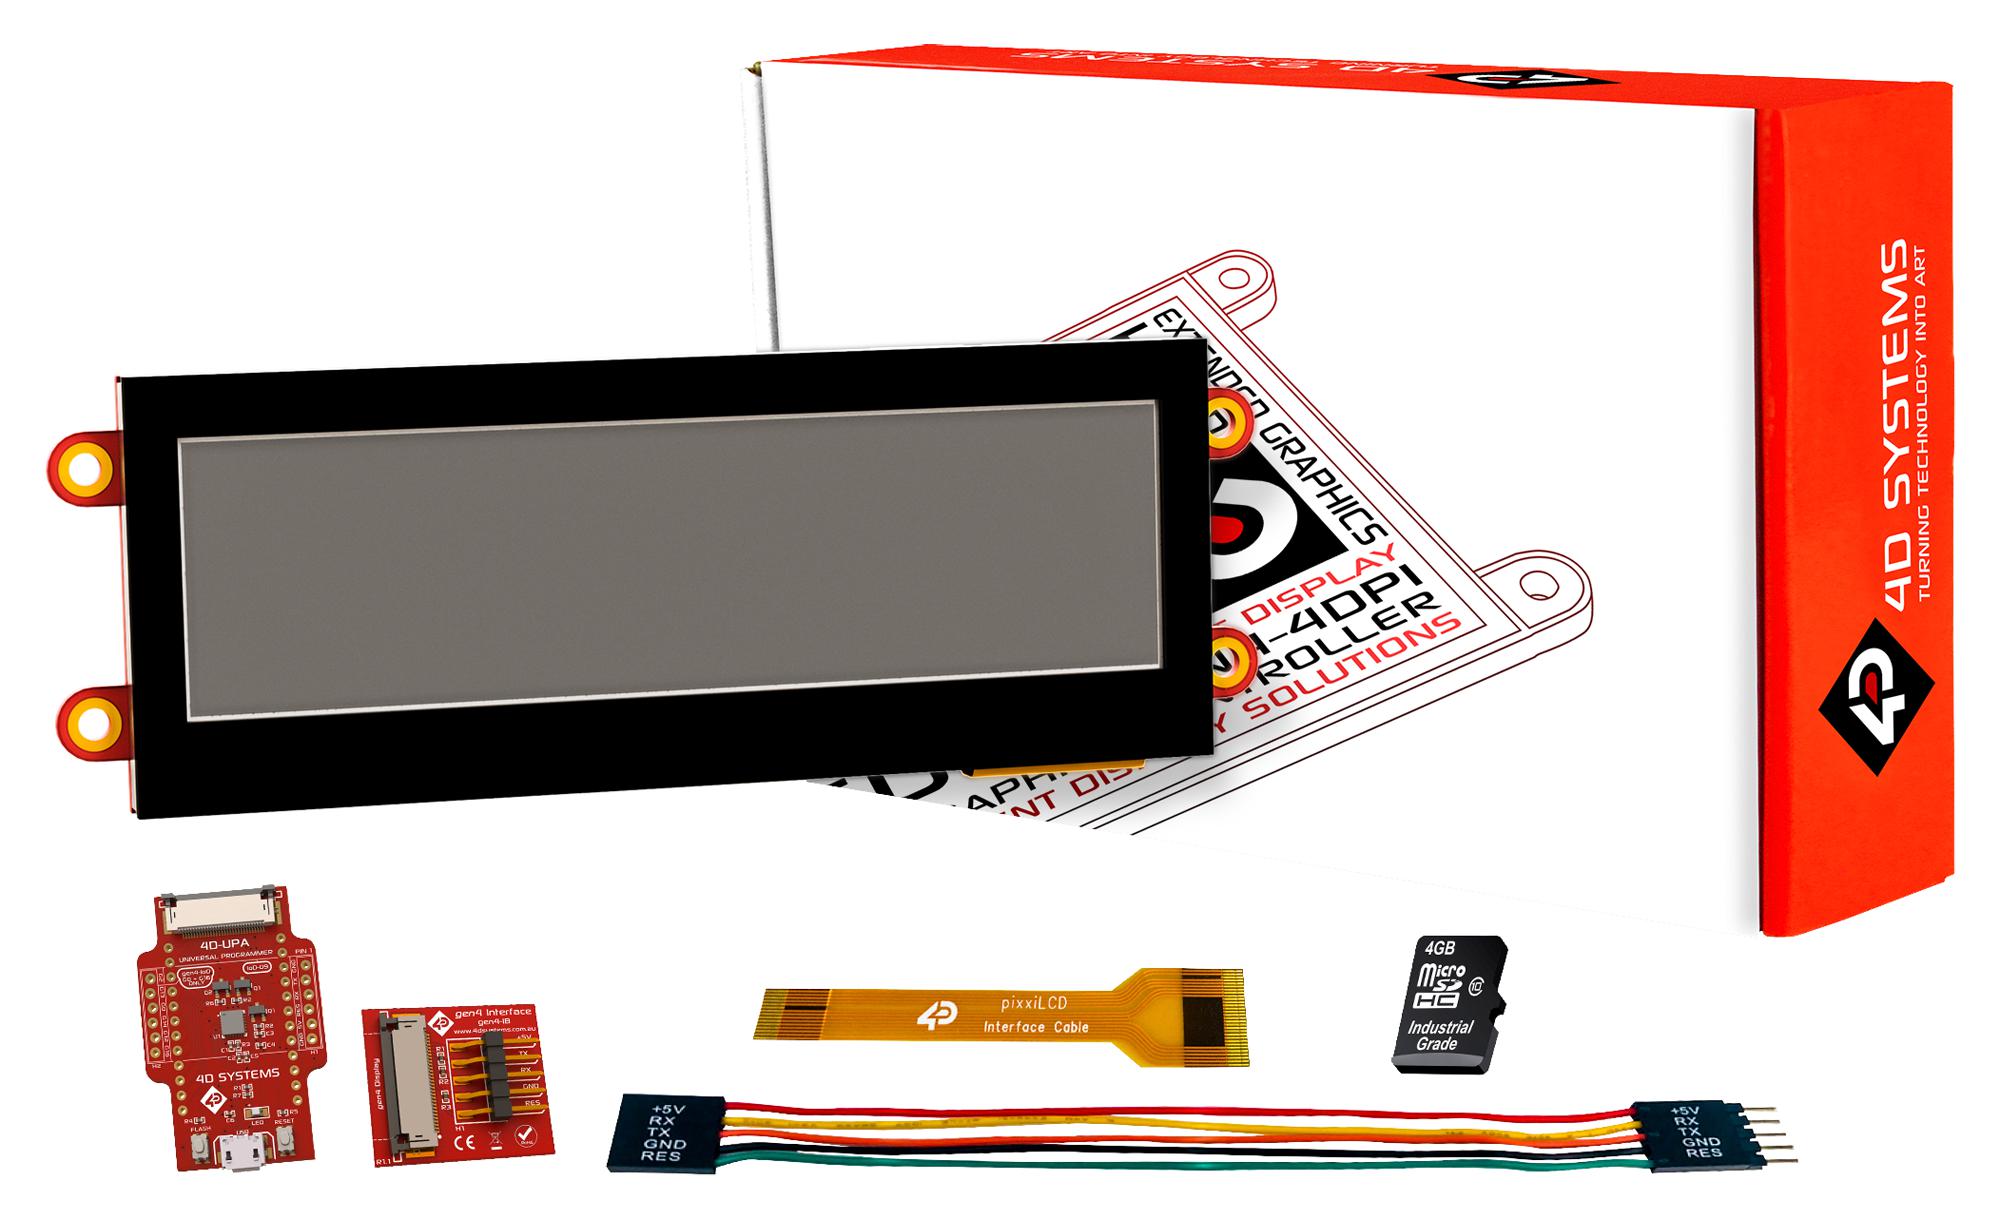 SK-PIXXILCD-39P4-CTP STARTER KIT, 3.9" GRAPHIC DISPLAY, CTP 4D SYSTEMS